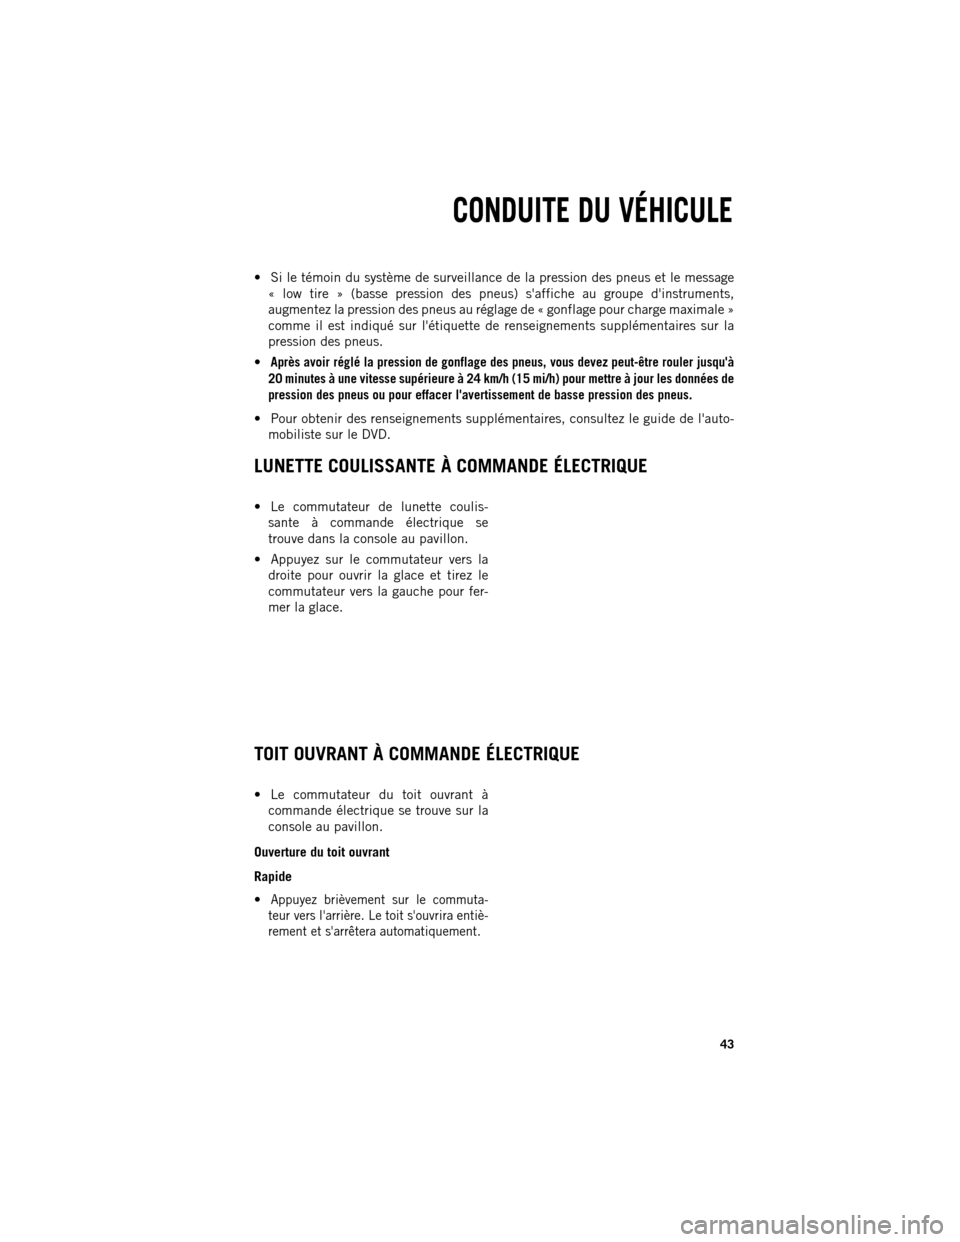 Ram 1500 2013  Guide dutilisateur (in French)  Si le témoin du système de surveillance de la pression des pneus et le message
« low tire » (basse pression des pneus) saffiche au groupe dinstruments,
augmentez la pression des pneus au régl